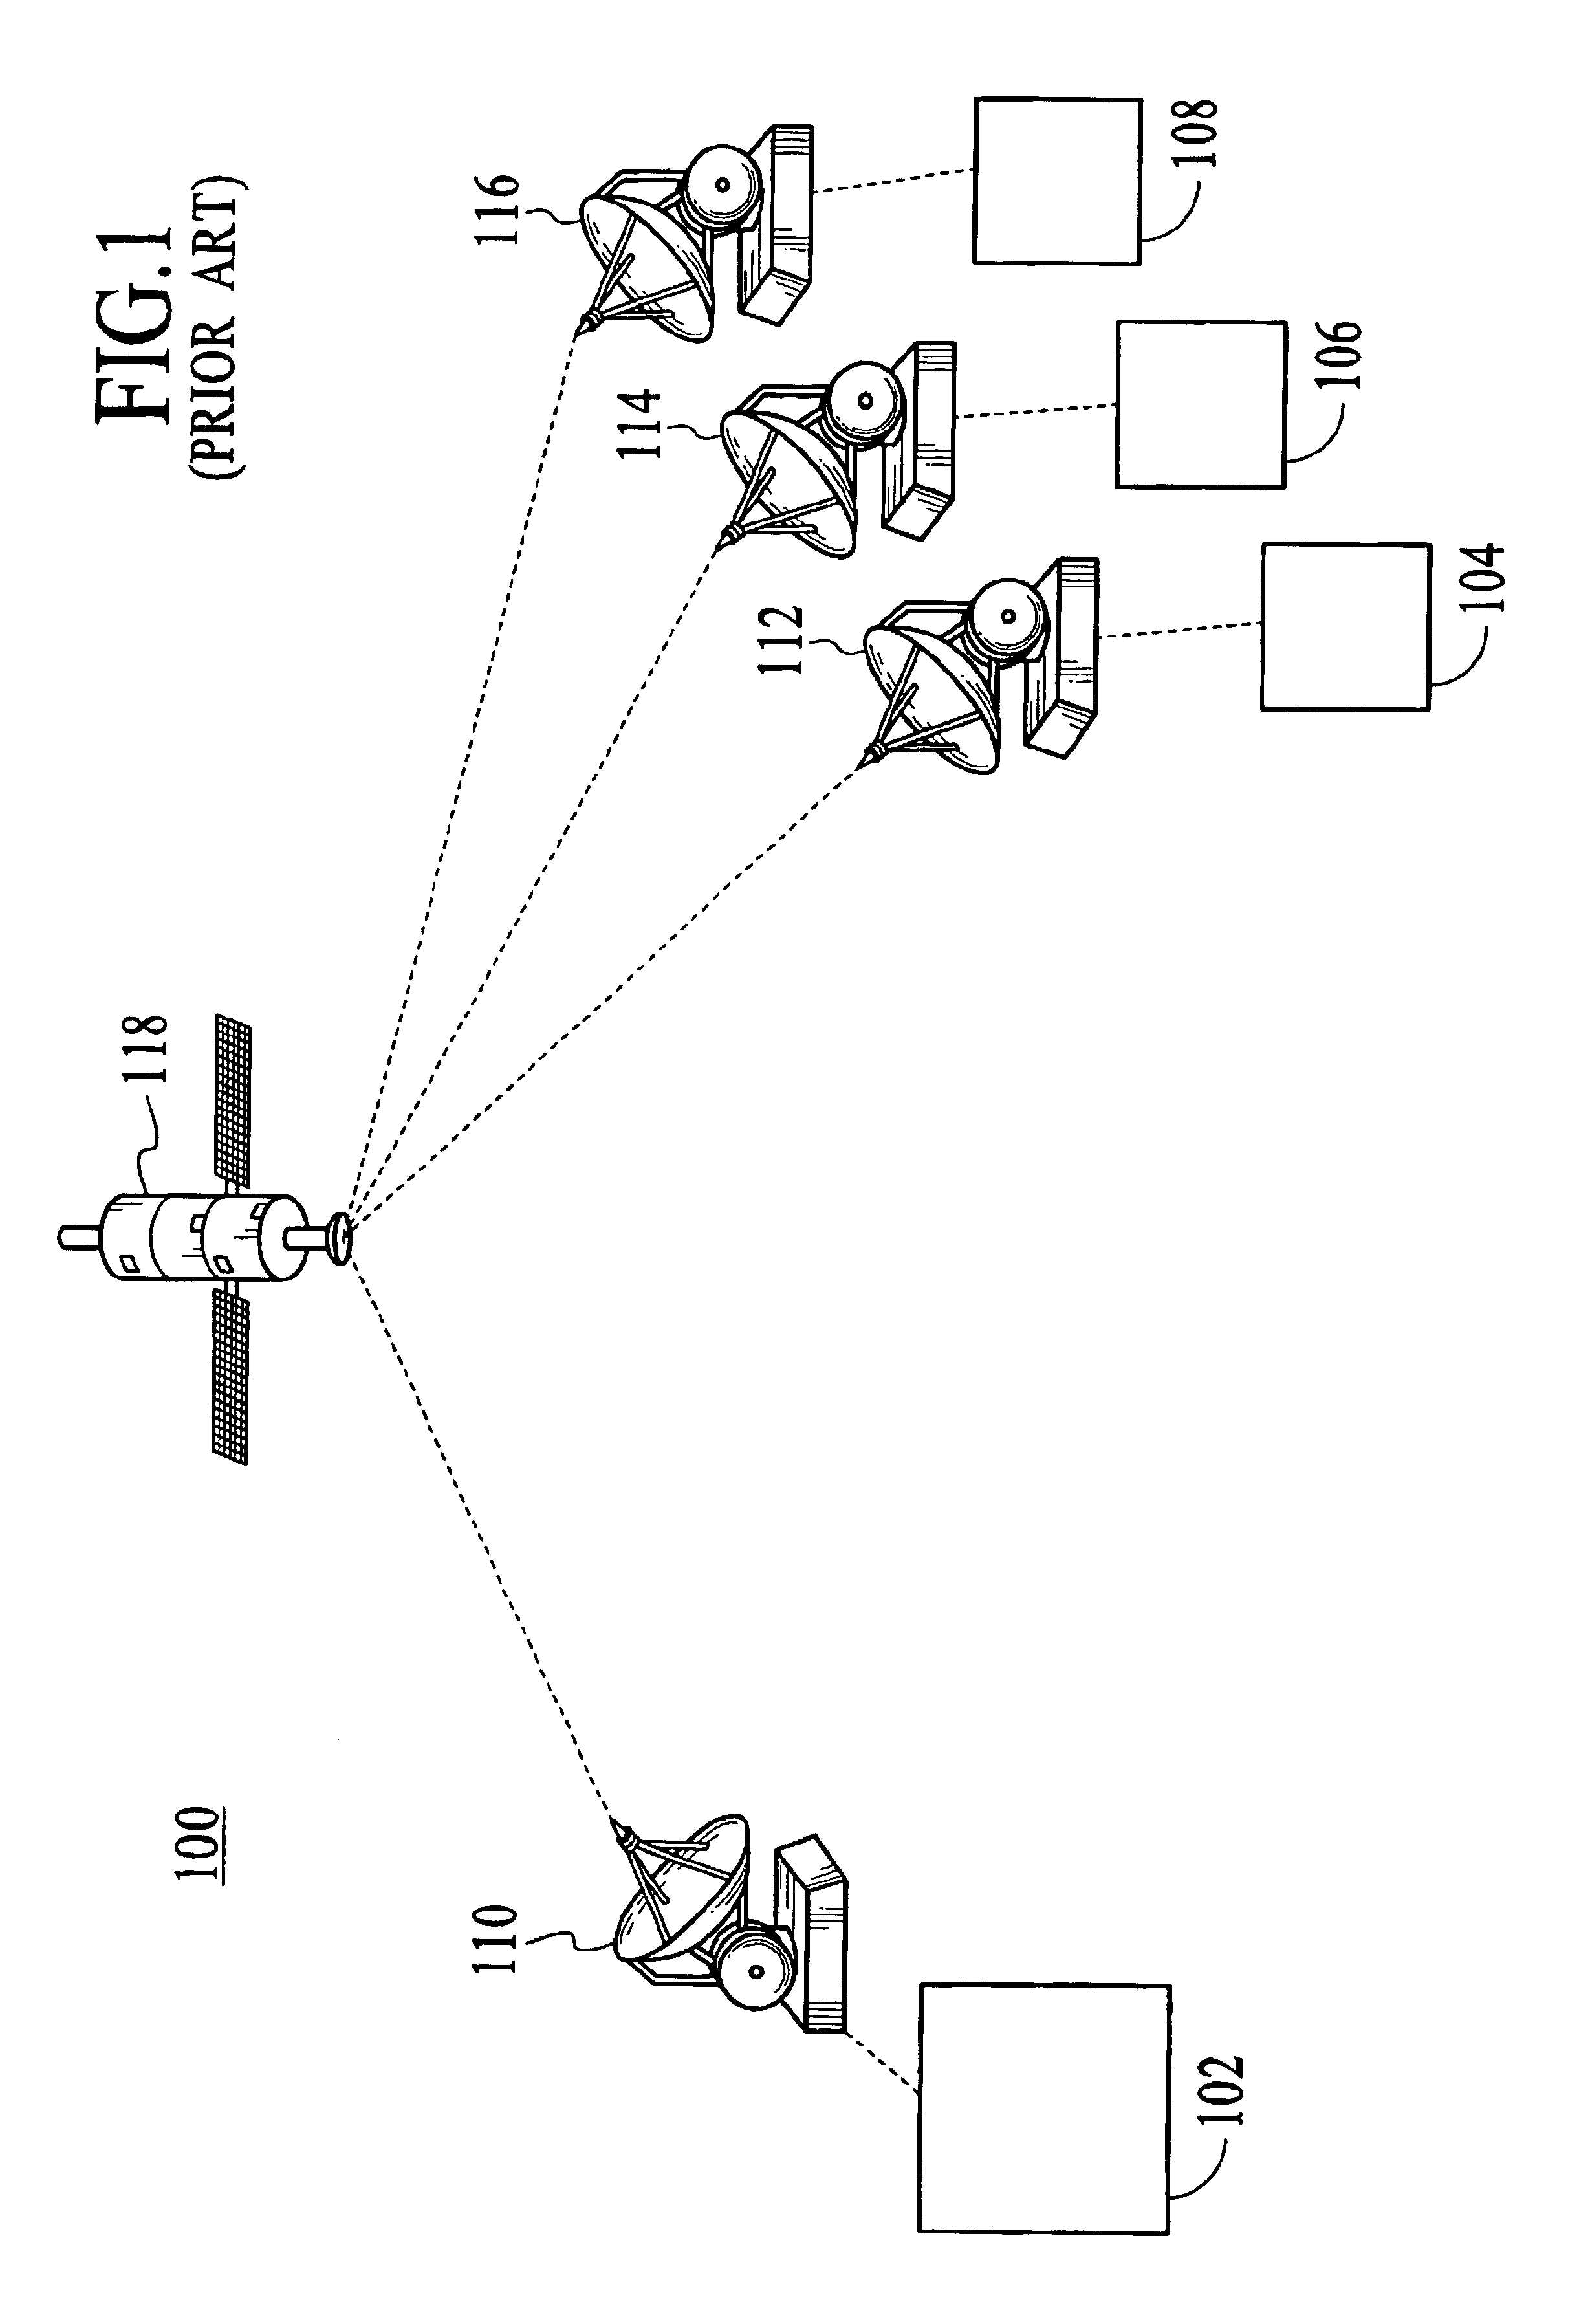 Method and system for a real-time bandwidth allocation scheduler for media delivery